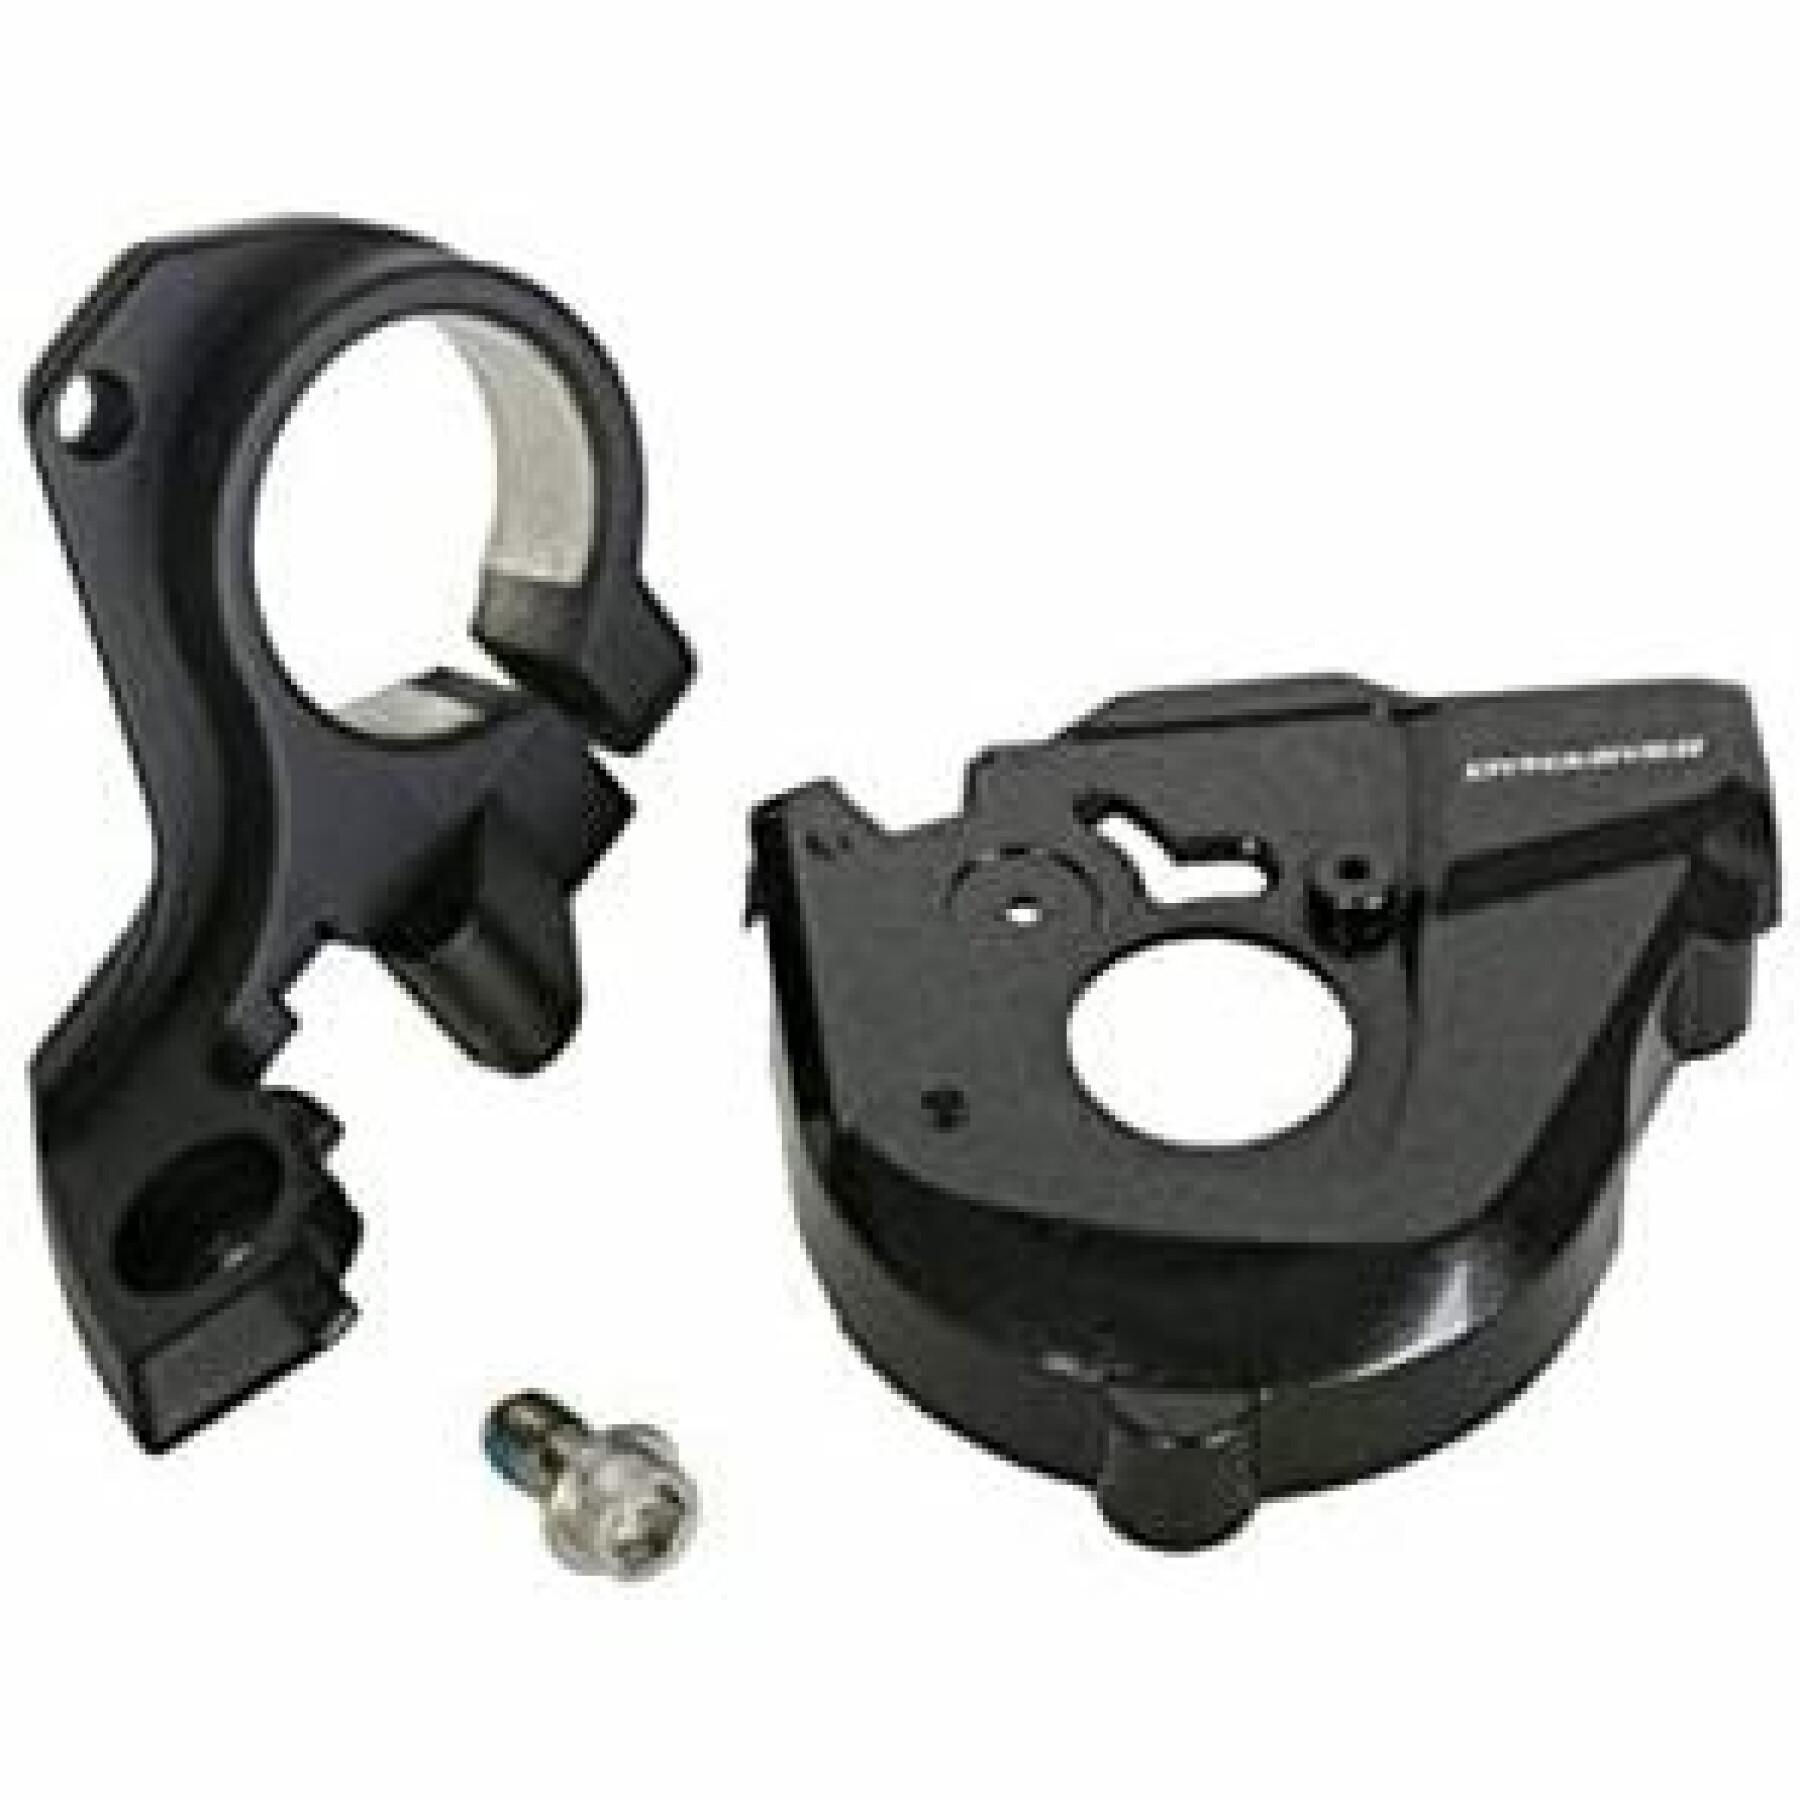 Left control cover unit for type without indicator Shimano SL-M8000